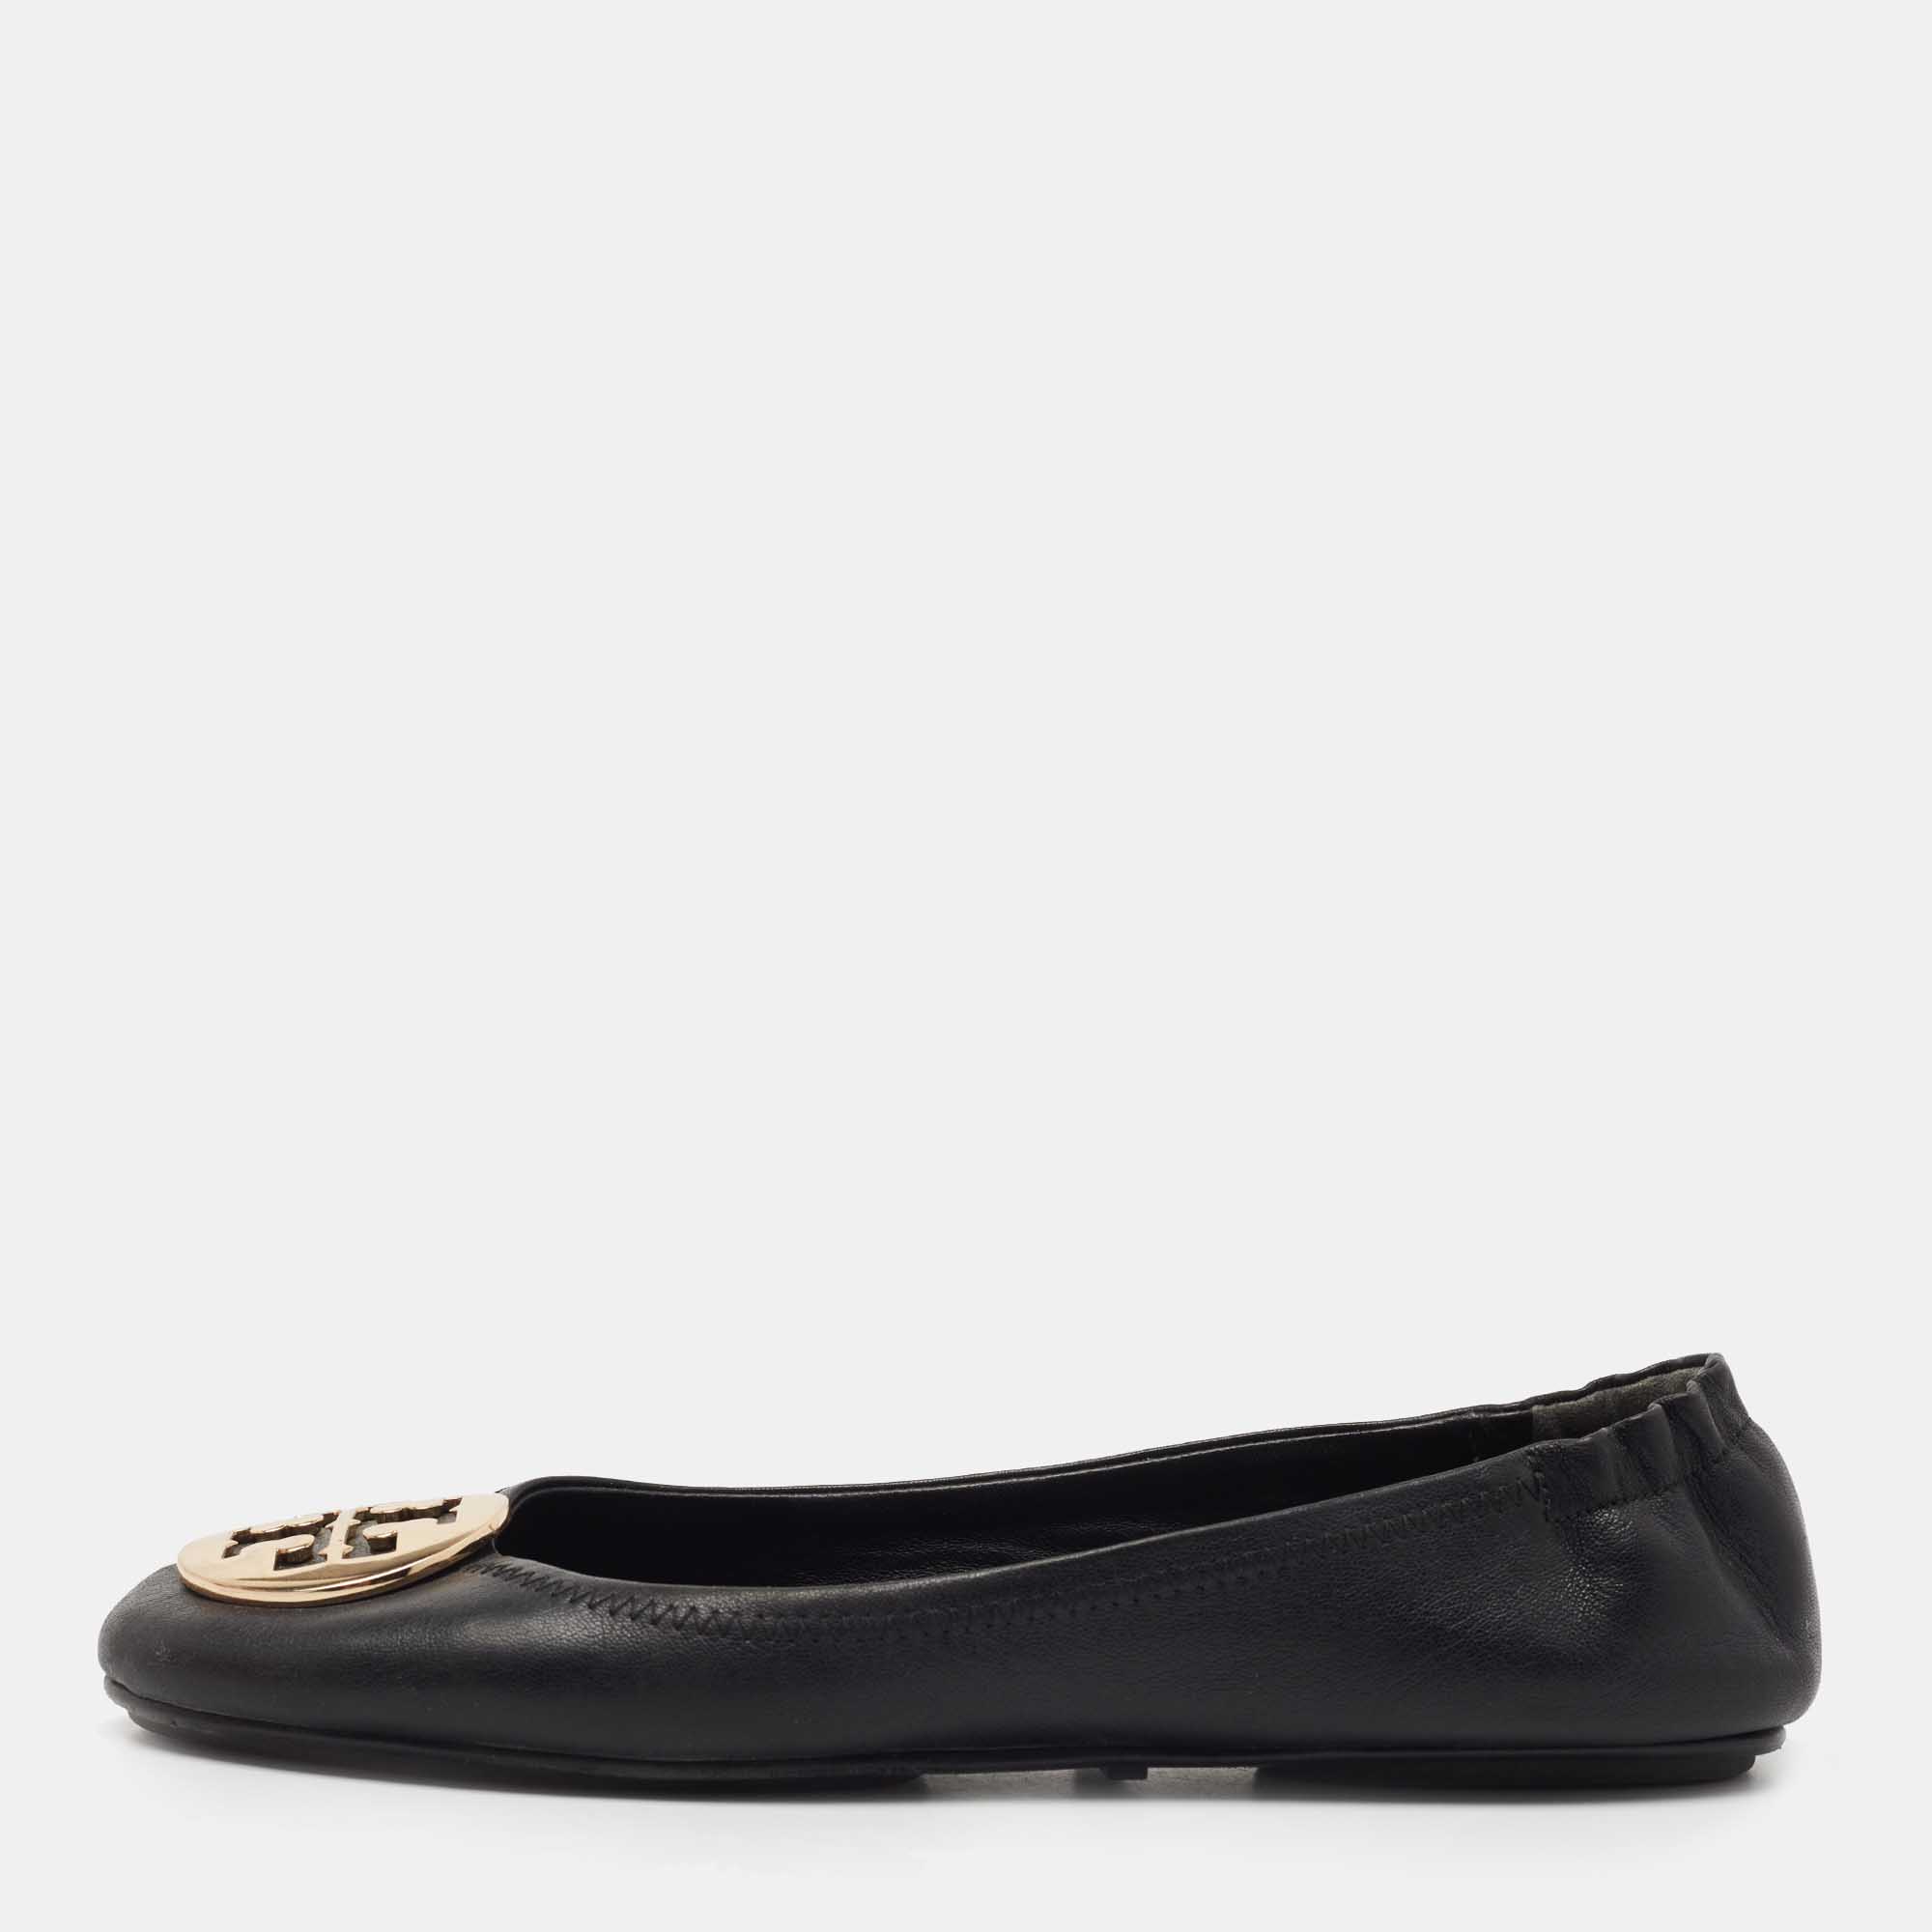 Pre-owned Tory Burch Black Leather Minnie Travel Ballet Flats Size 39.5